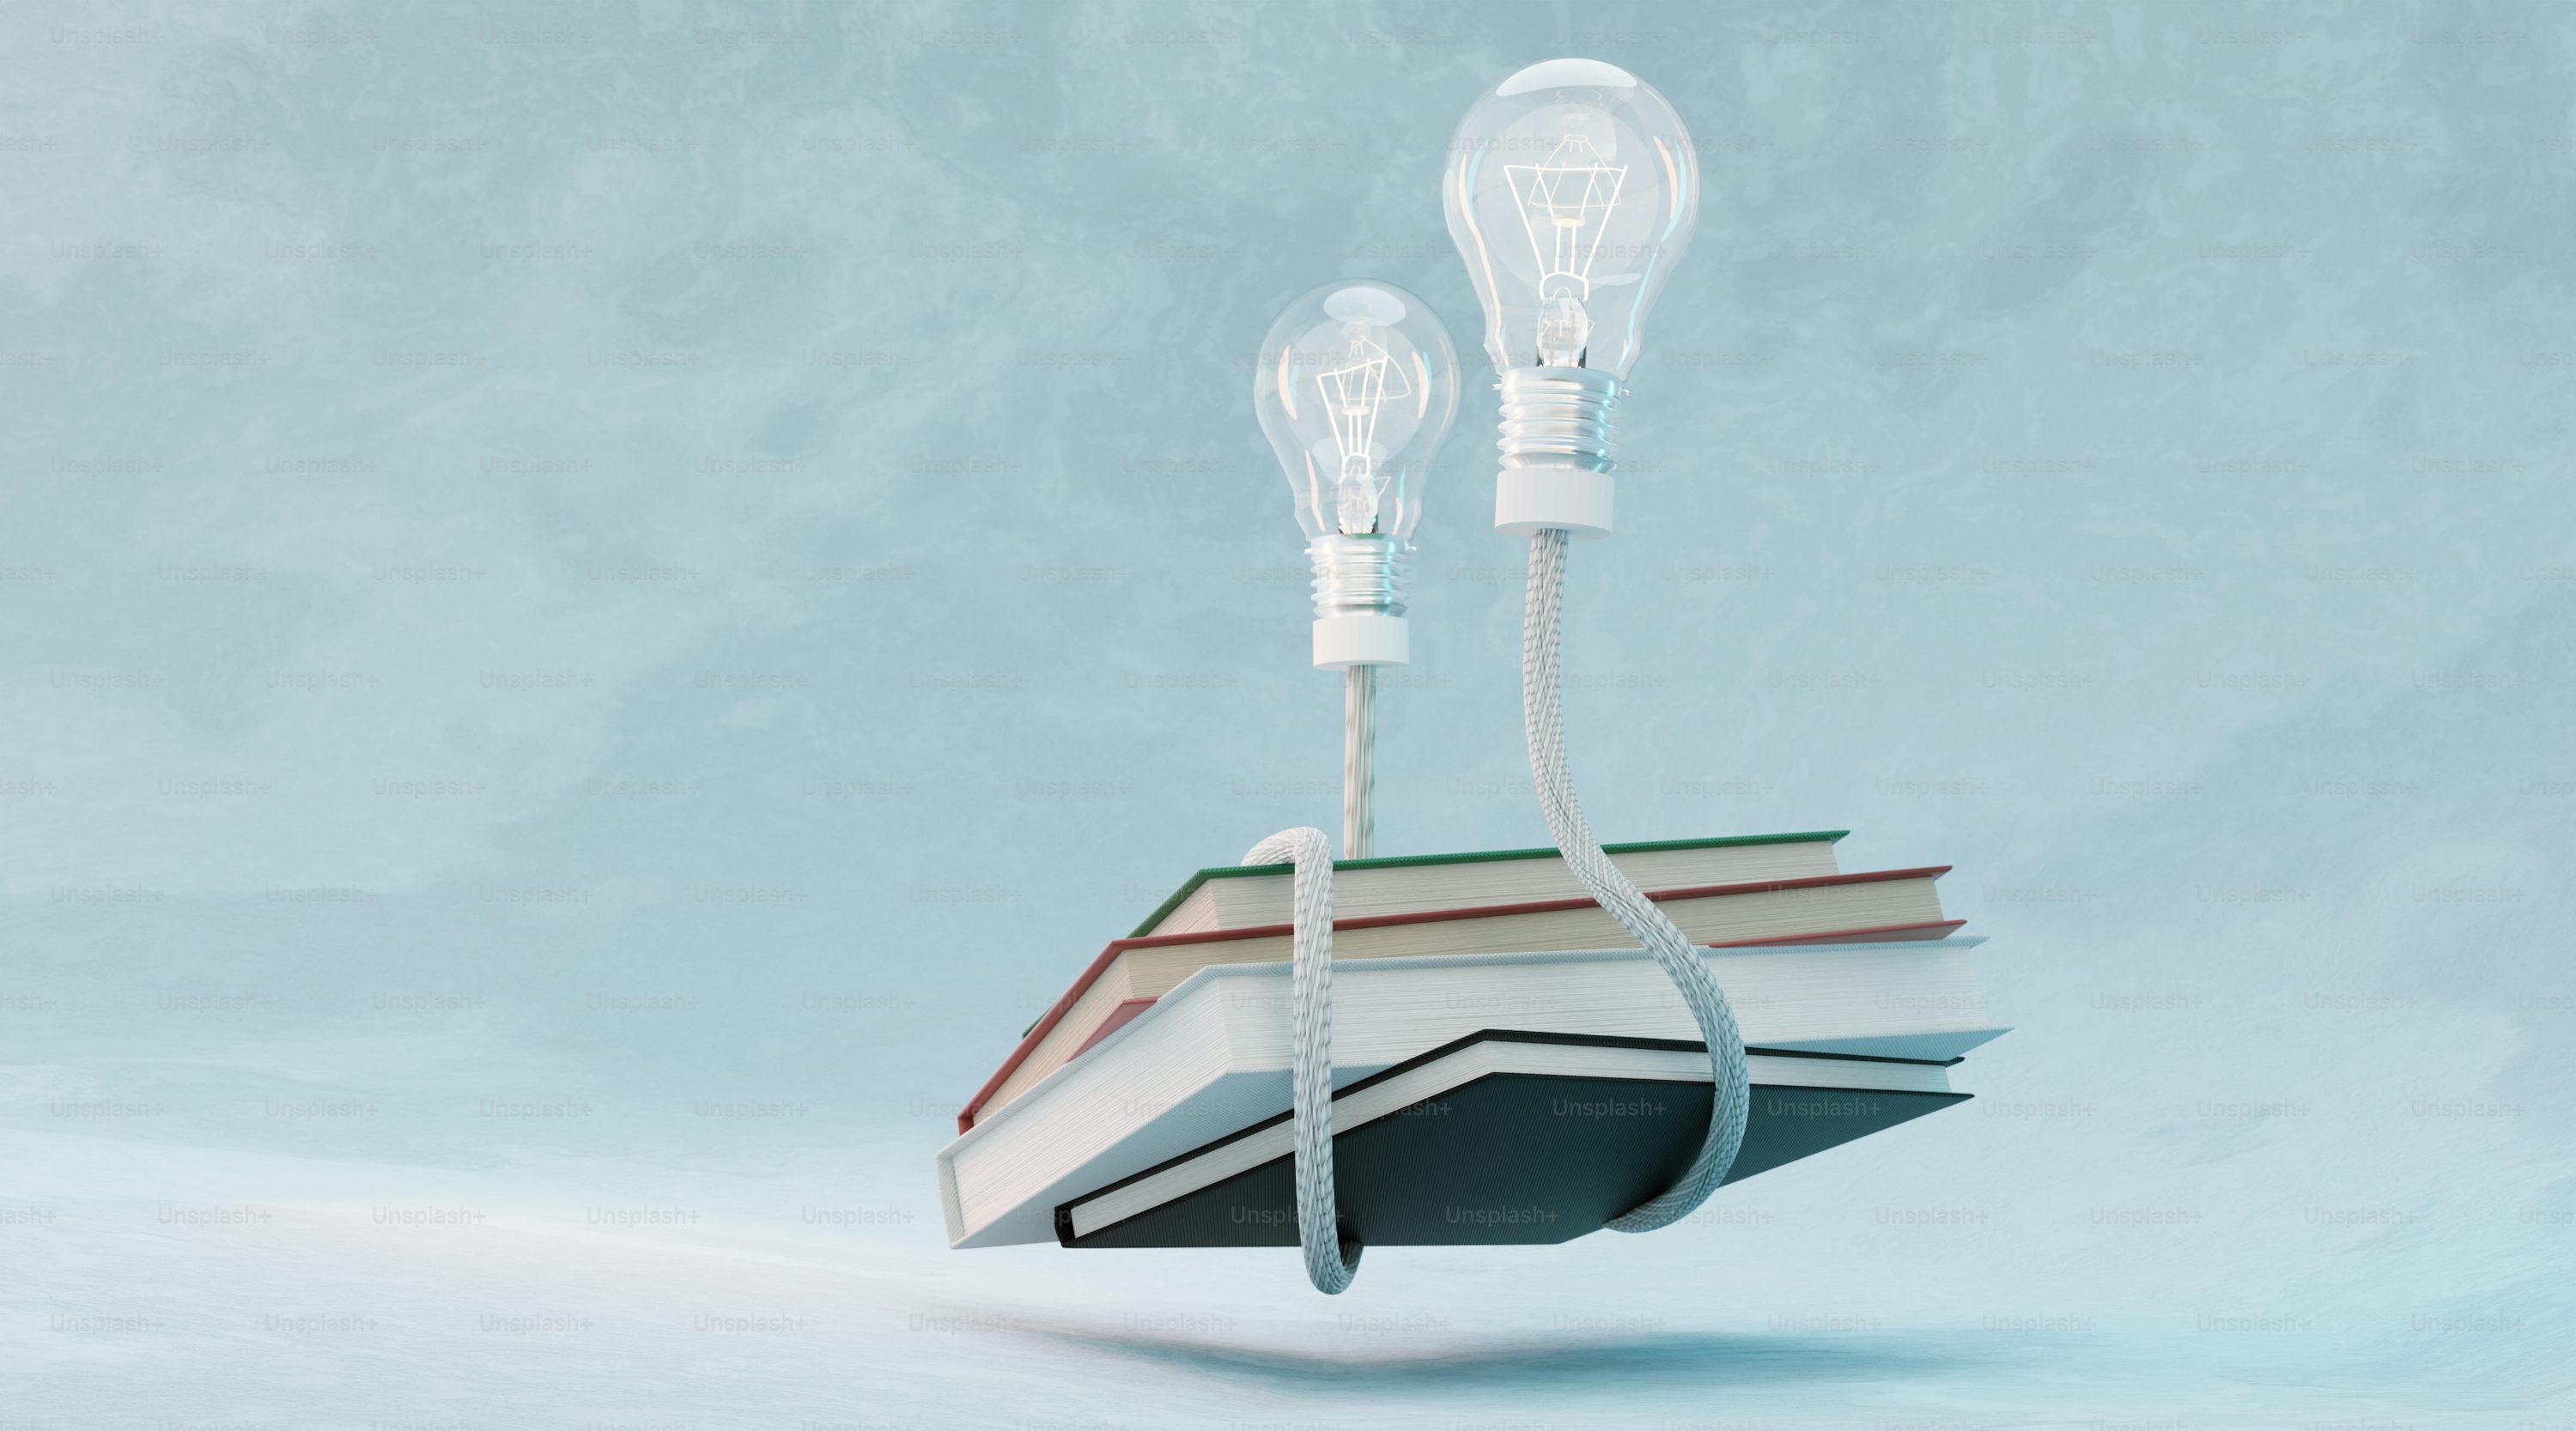 knowledge a book with two light bulbs attached to it